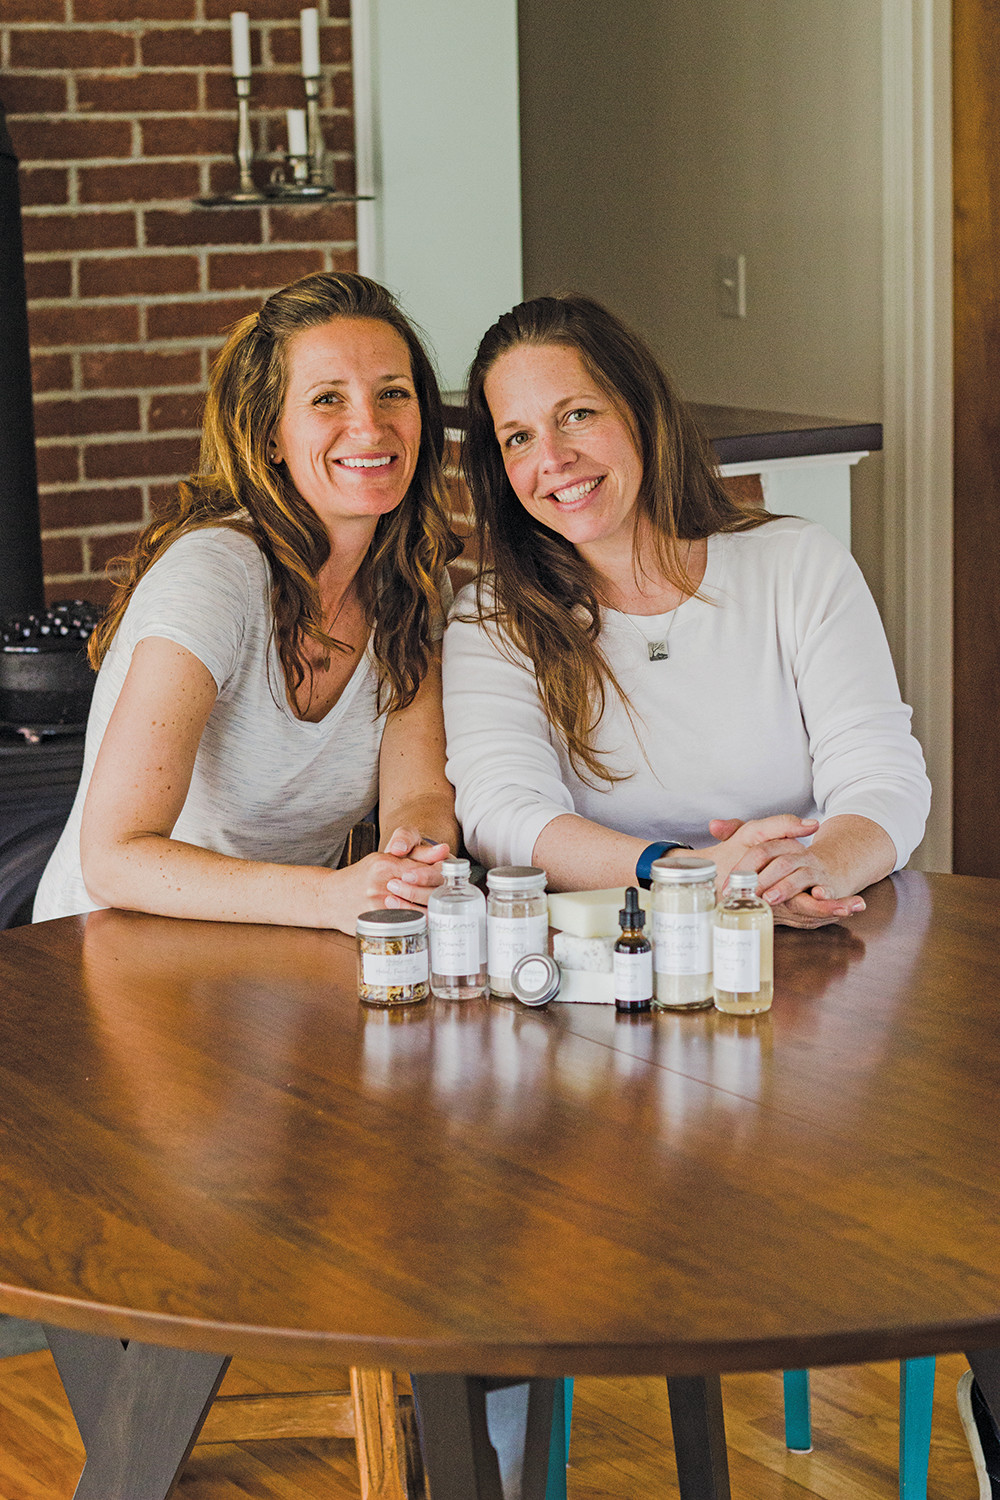 Herbalicious founder Carolyn Balint (right) now shares operations with friend and manager Robin Plaziak